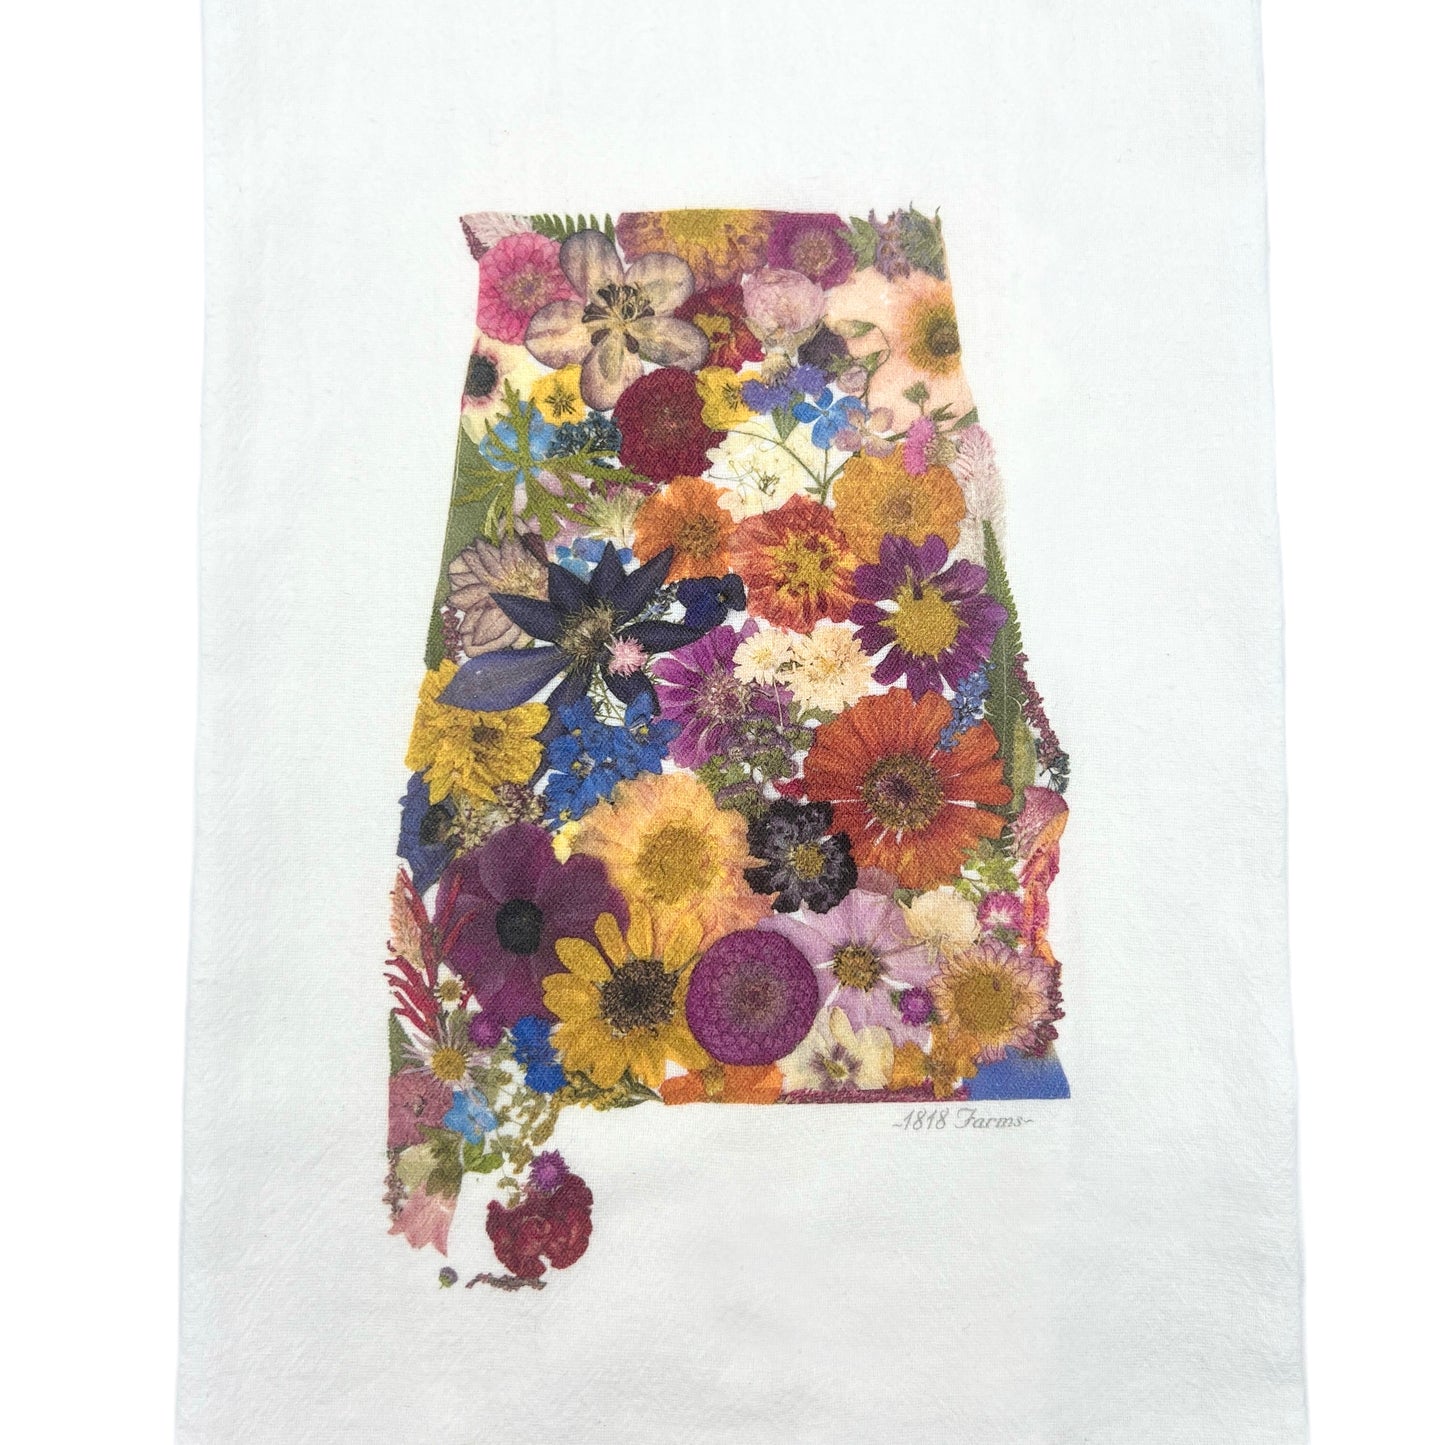 Alabama Themed Flour Sack Towel Featuring Dried, Pressed Flowers - "Where I Bloom" Collection Towel 1818 Farms   